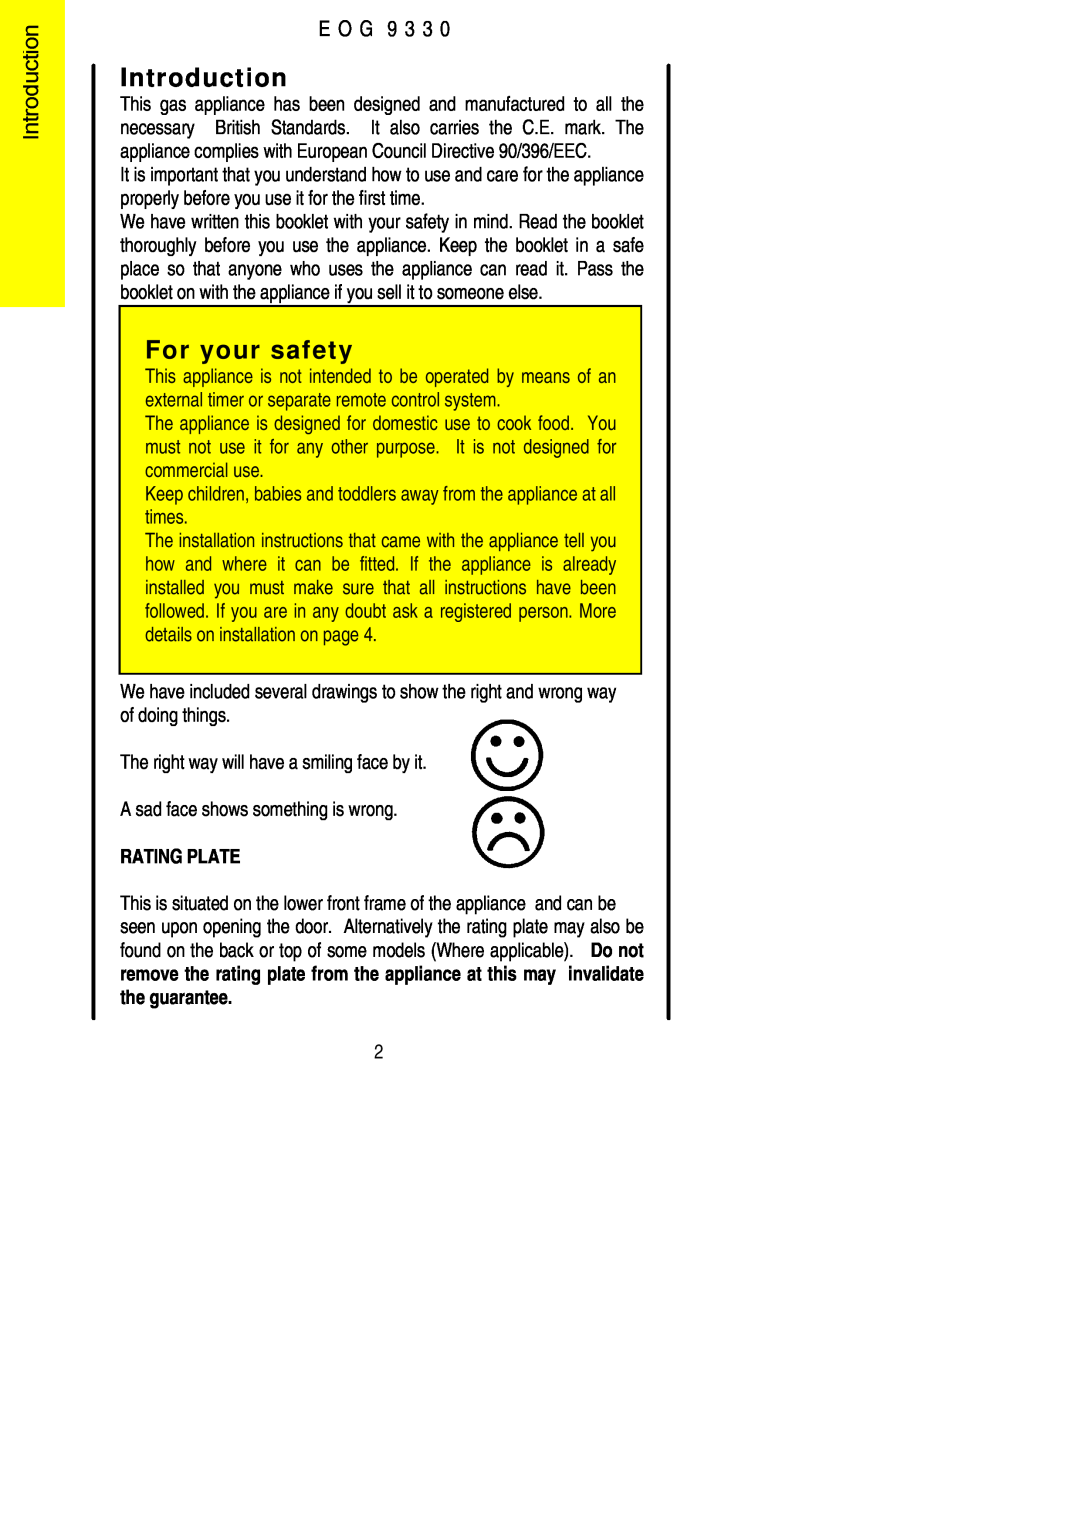 Electrolux EOG9330 manual Introduction, For your safety, E O G, Rating Plate 